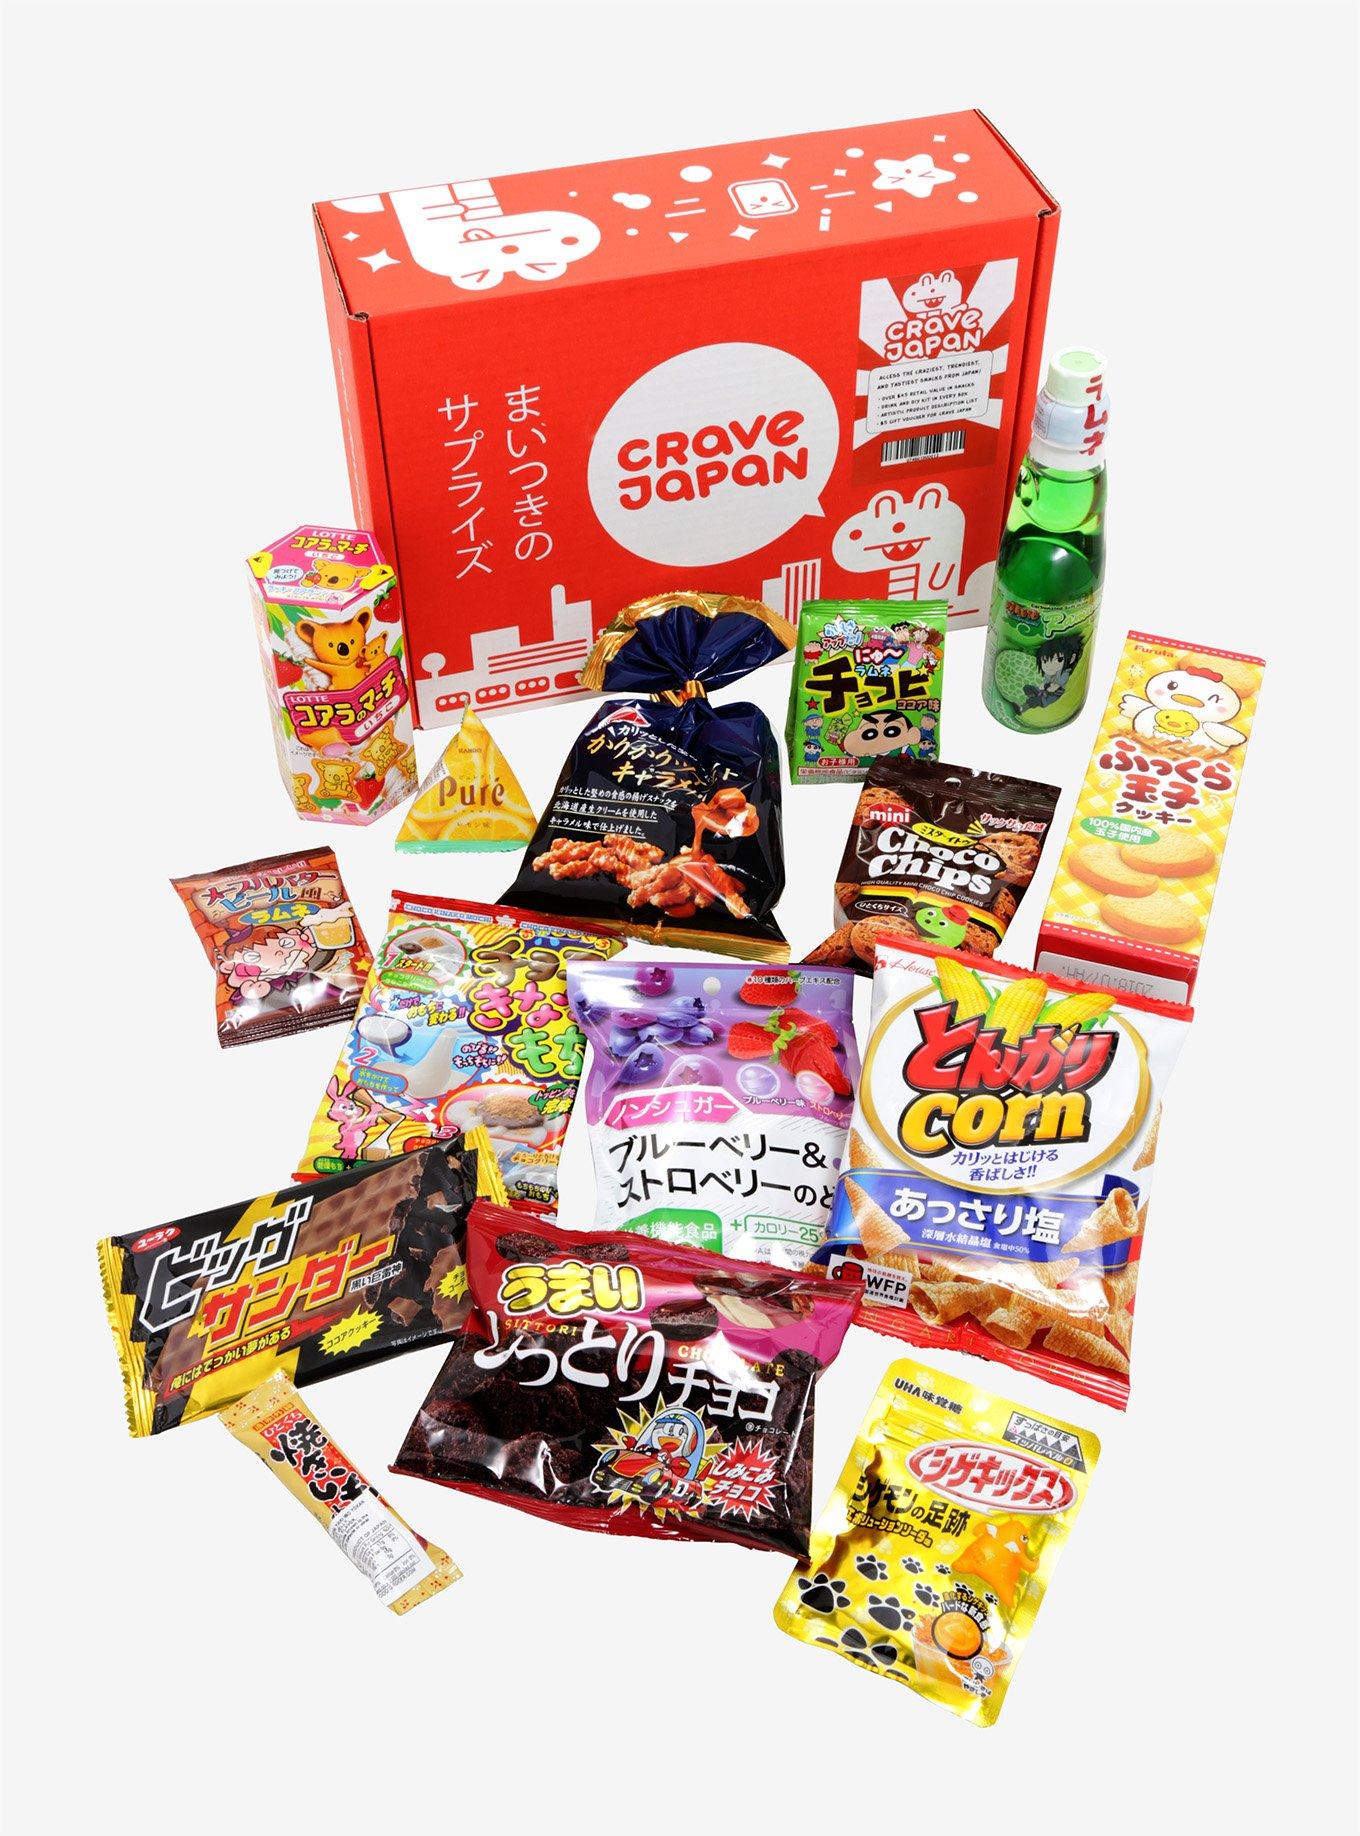 Asian Food Grocer Hello Sanrio Mystery Snack Box